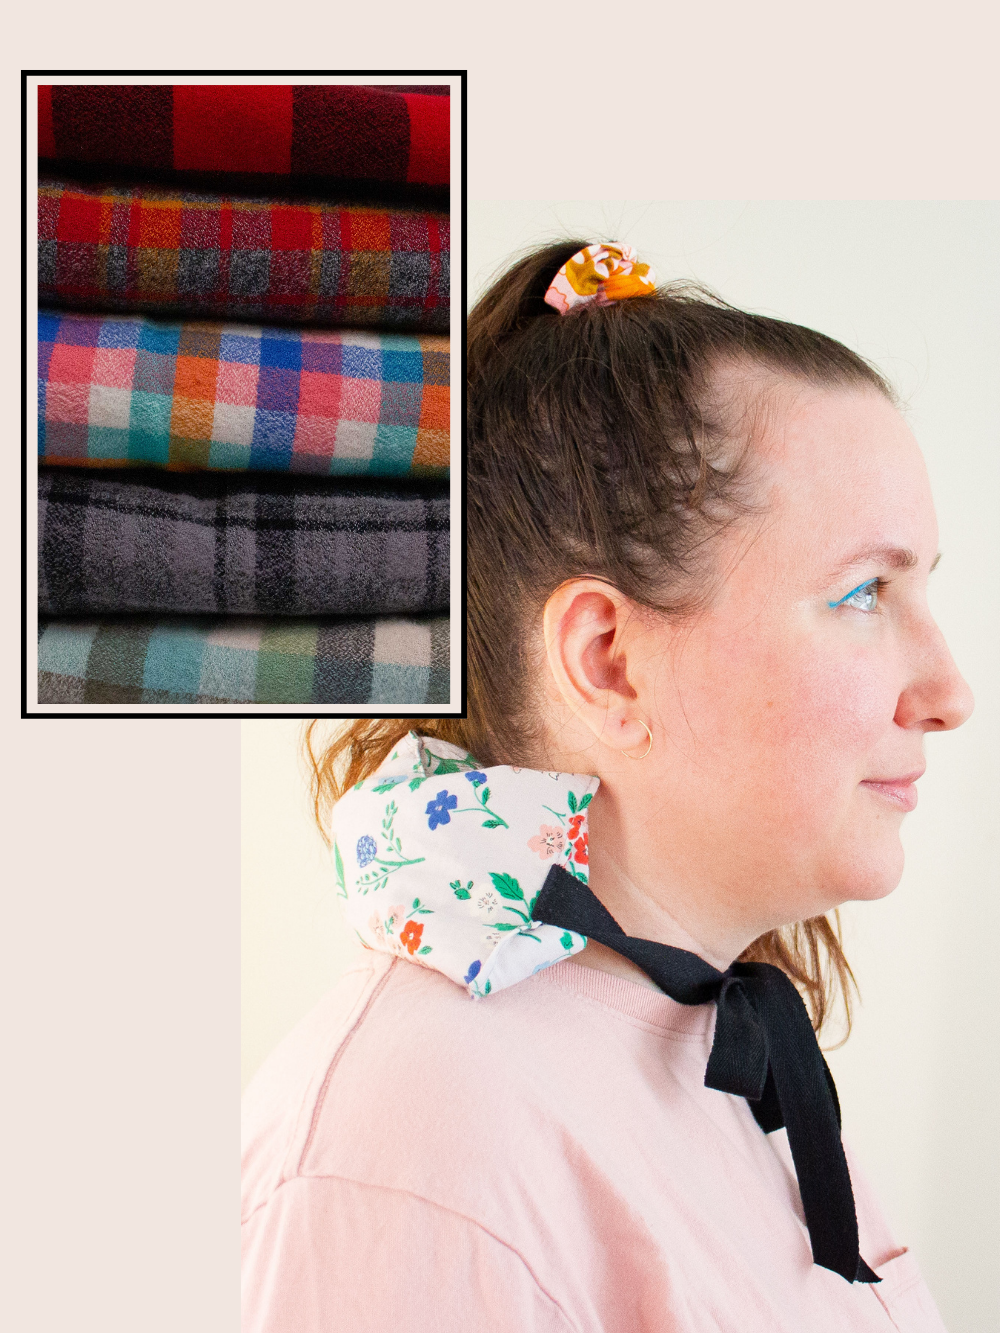 Profile of a smiling woman has a cherry pit grain bag with ties tied around her neck. Inset image with plaid fabric options in 5 different colors. 